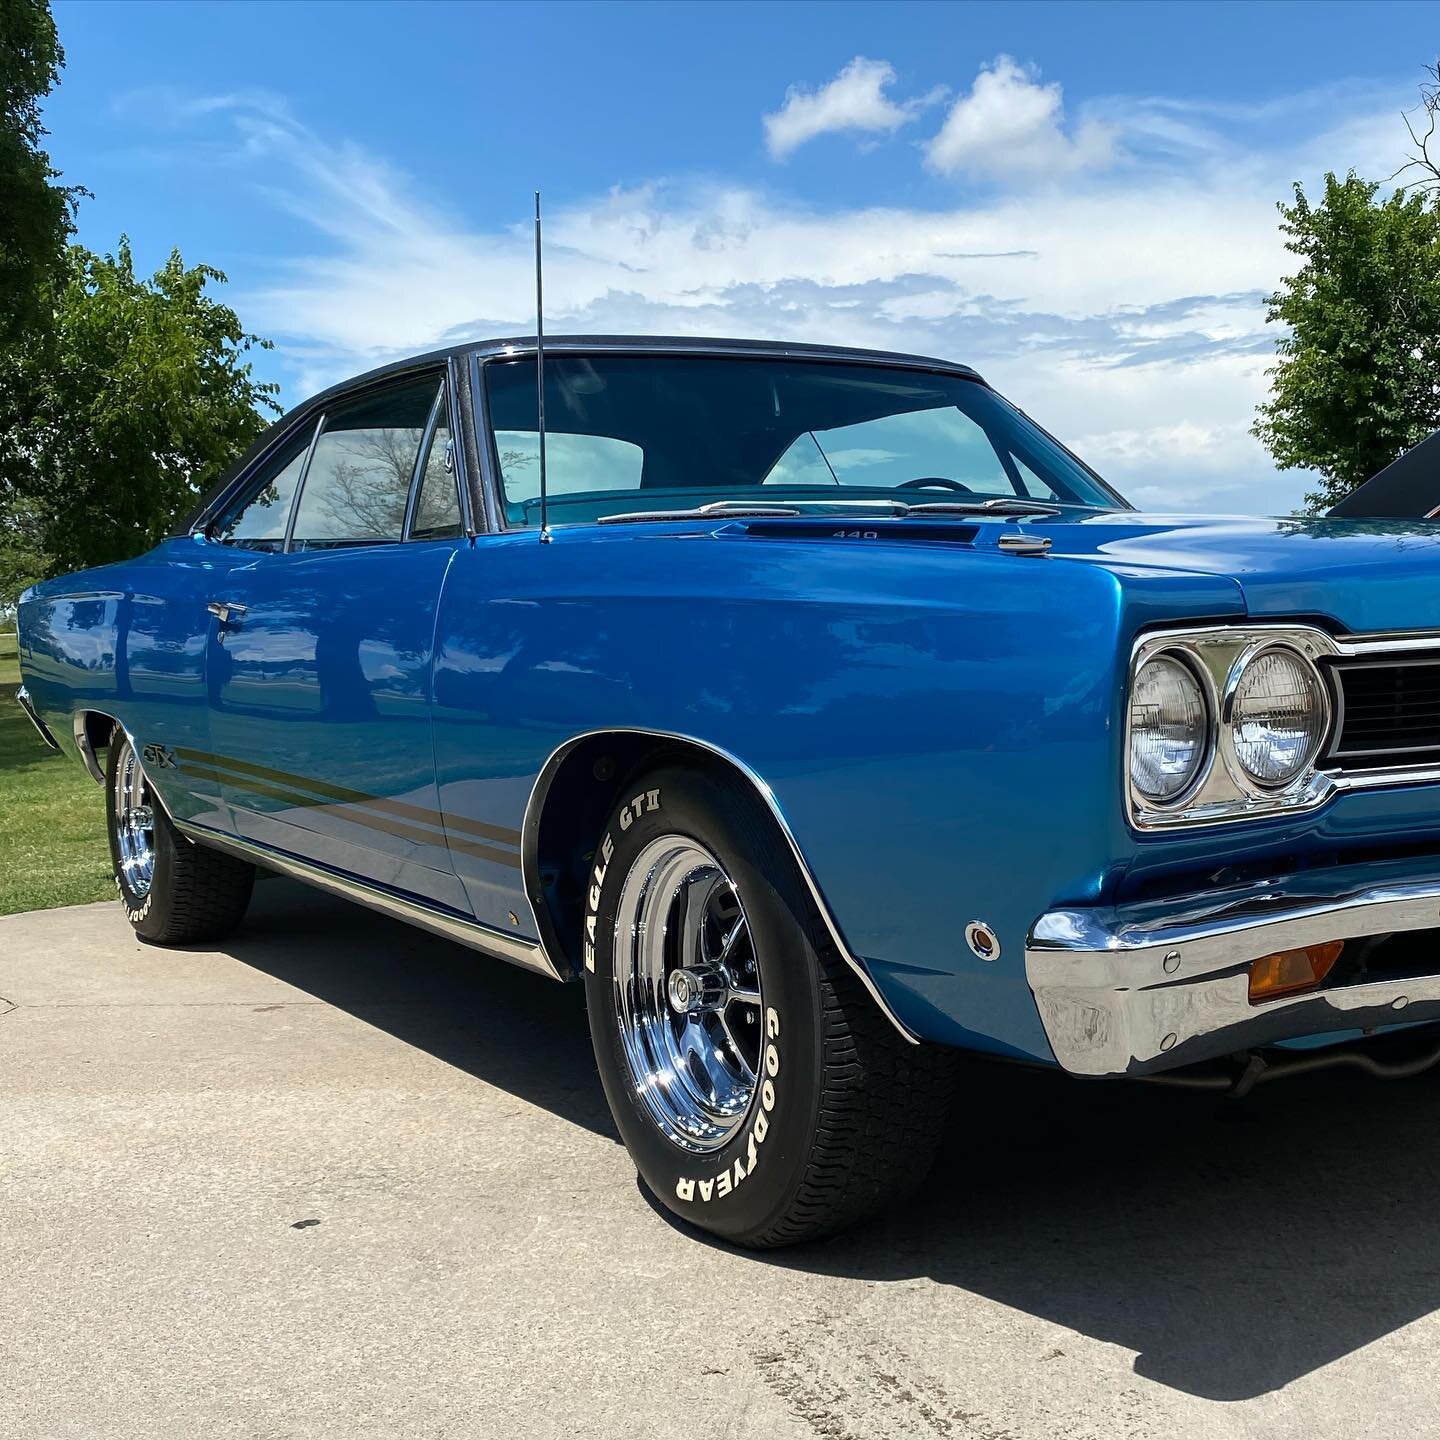 1969 Plymouth GTX 440 all polished up &amp; ready for Texas car shows.